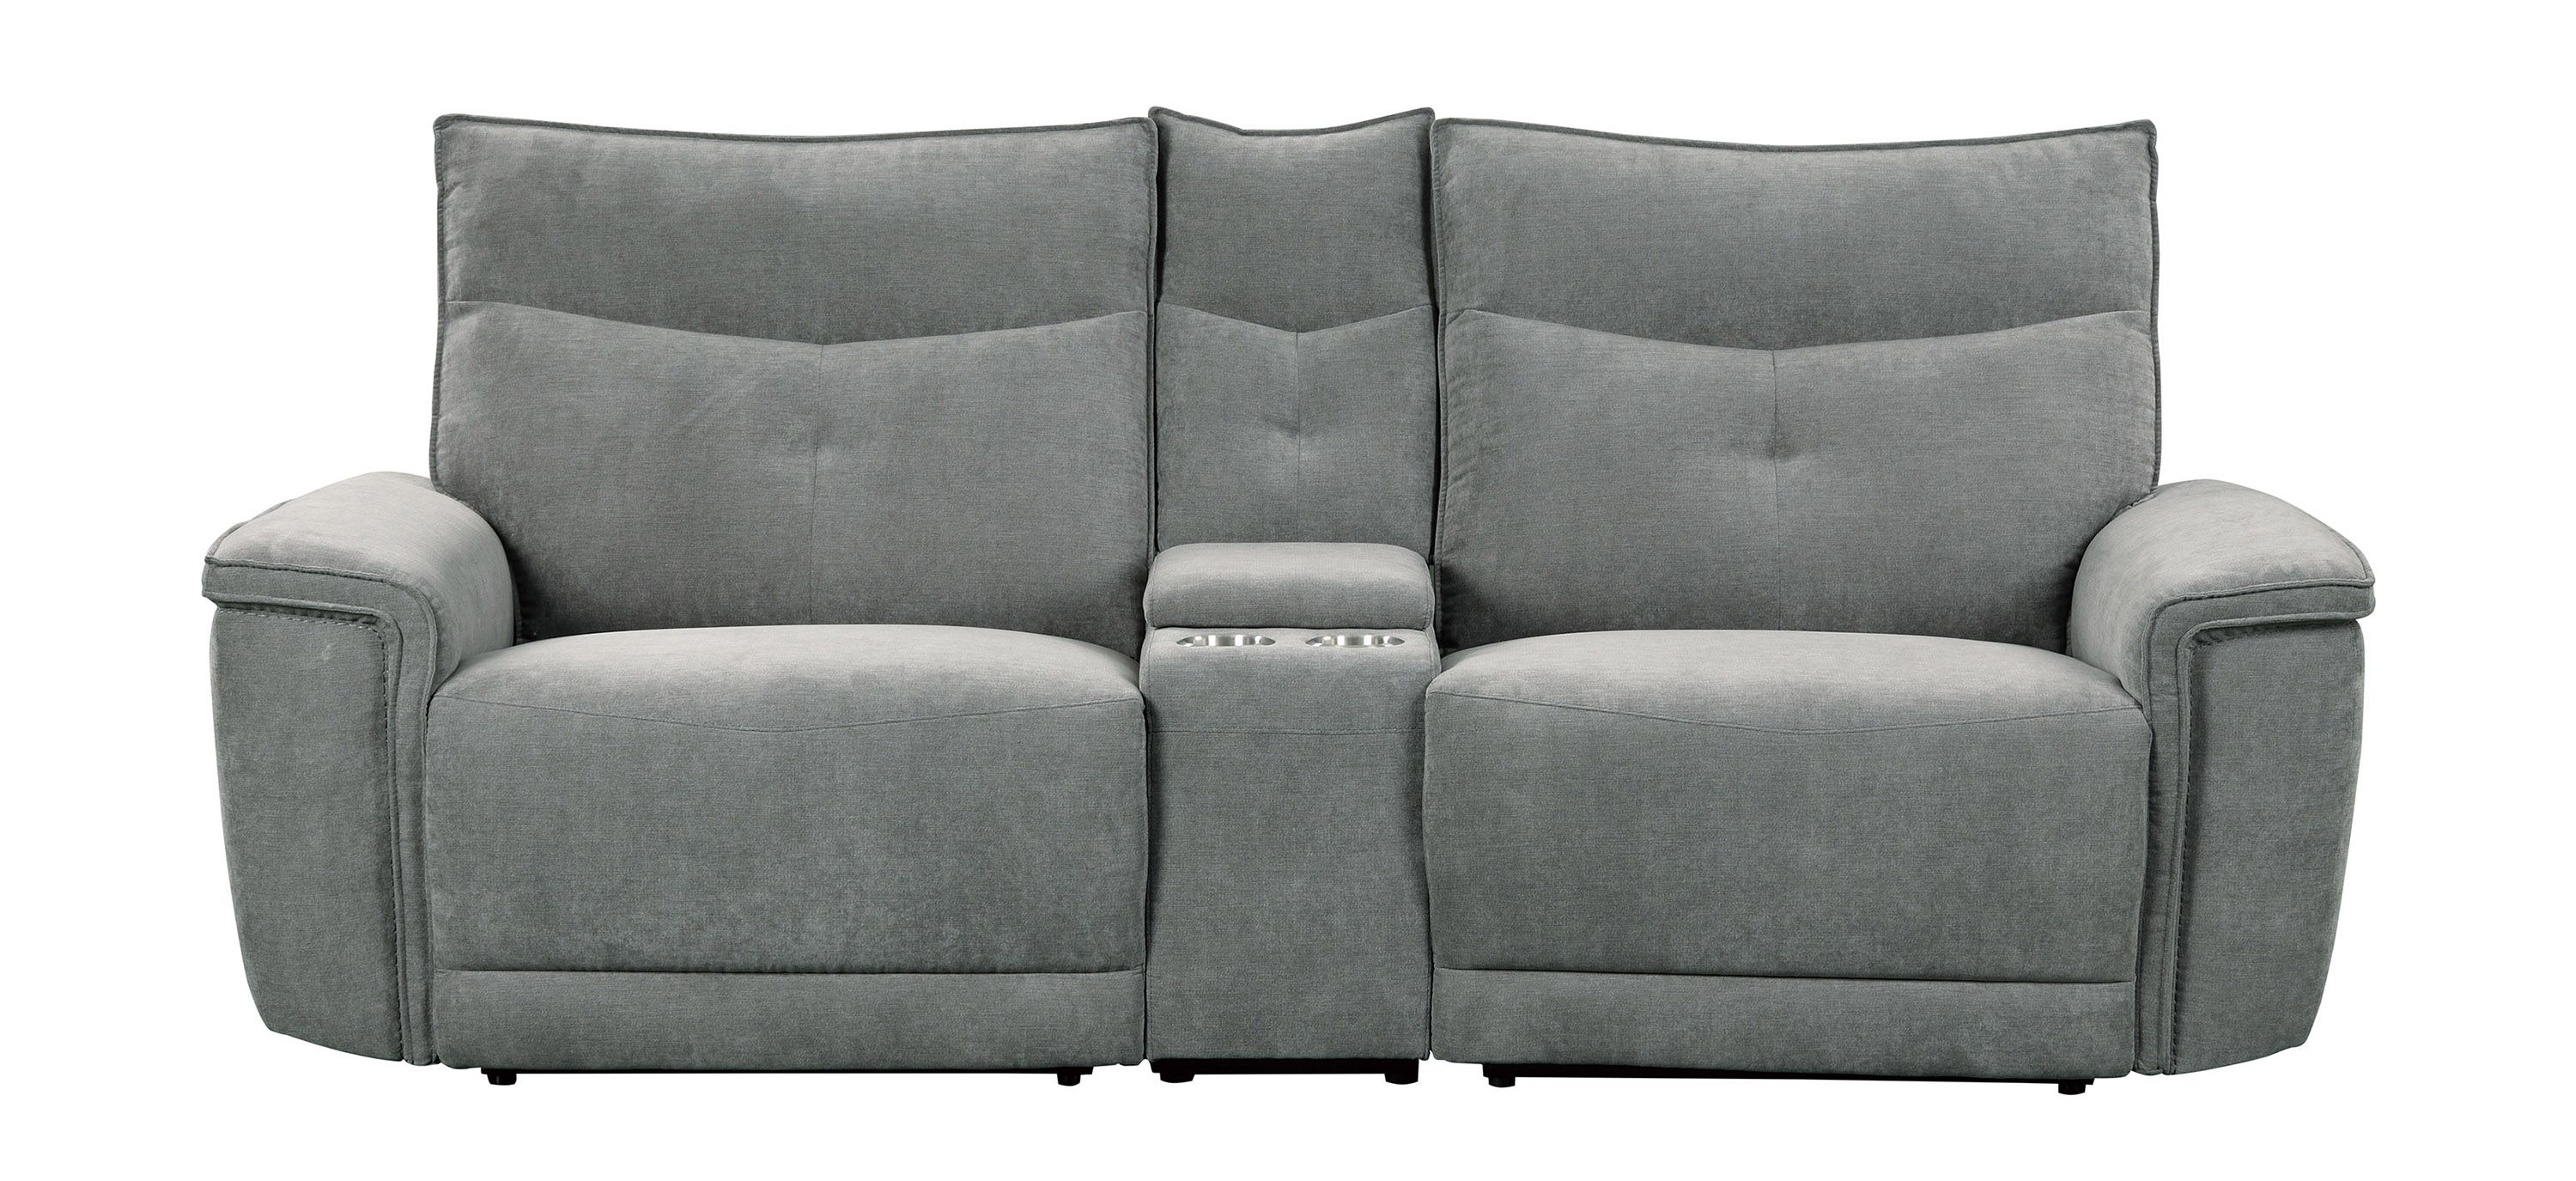 Graceland 3-Pc. Sectional Sofa with Cupholders